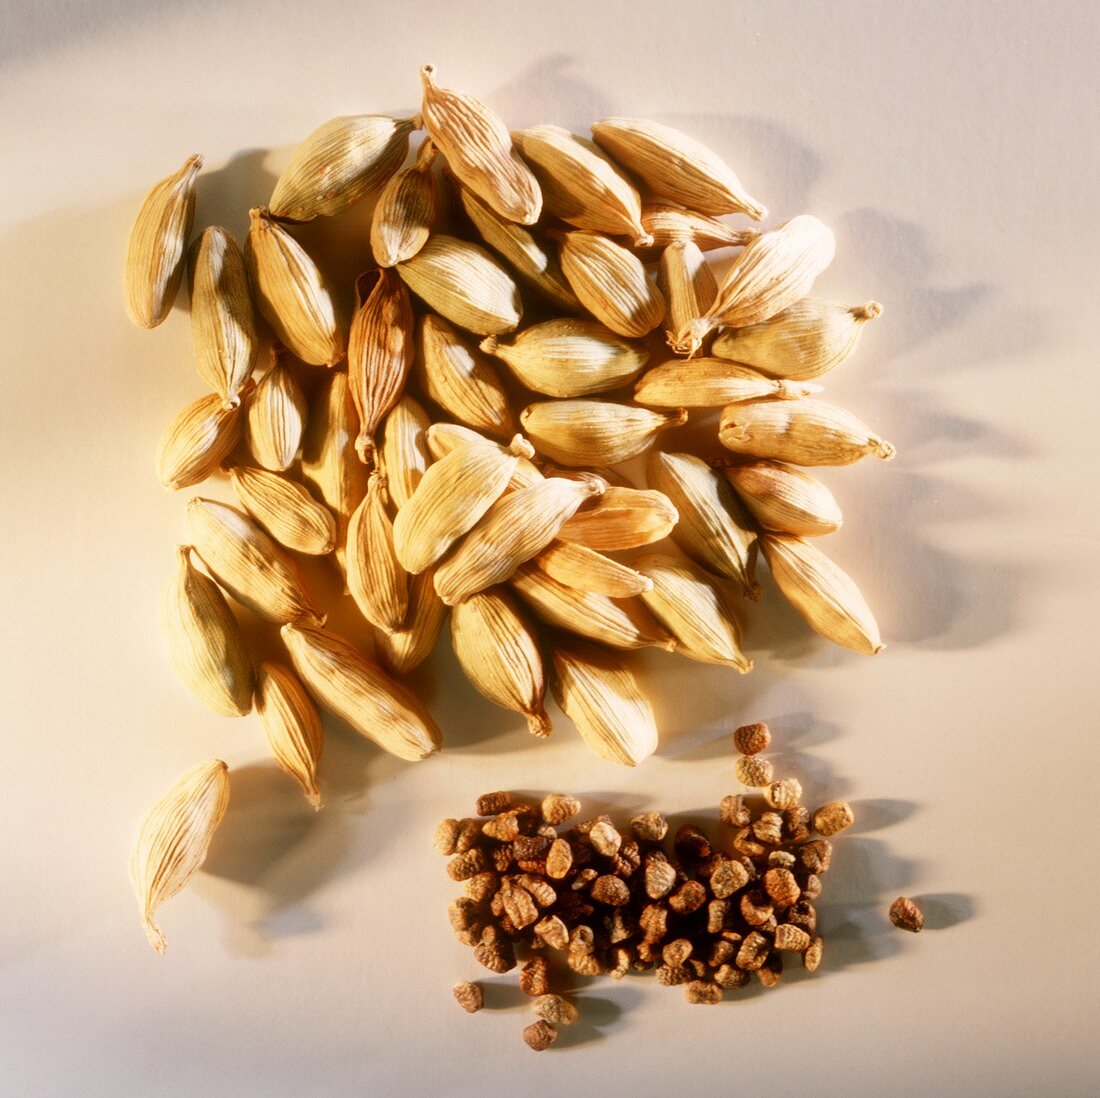 Cardamom capsules and seeds on light background